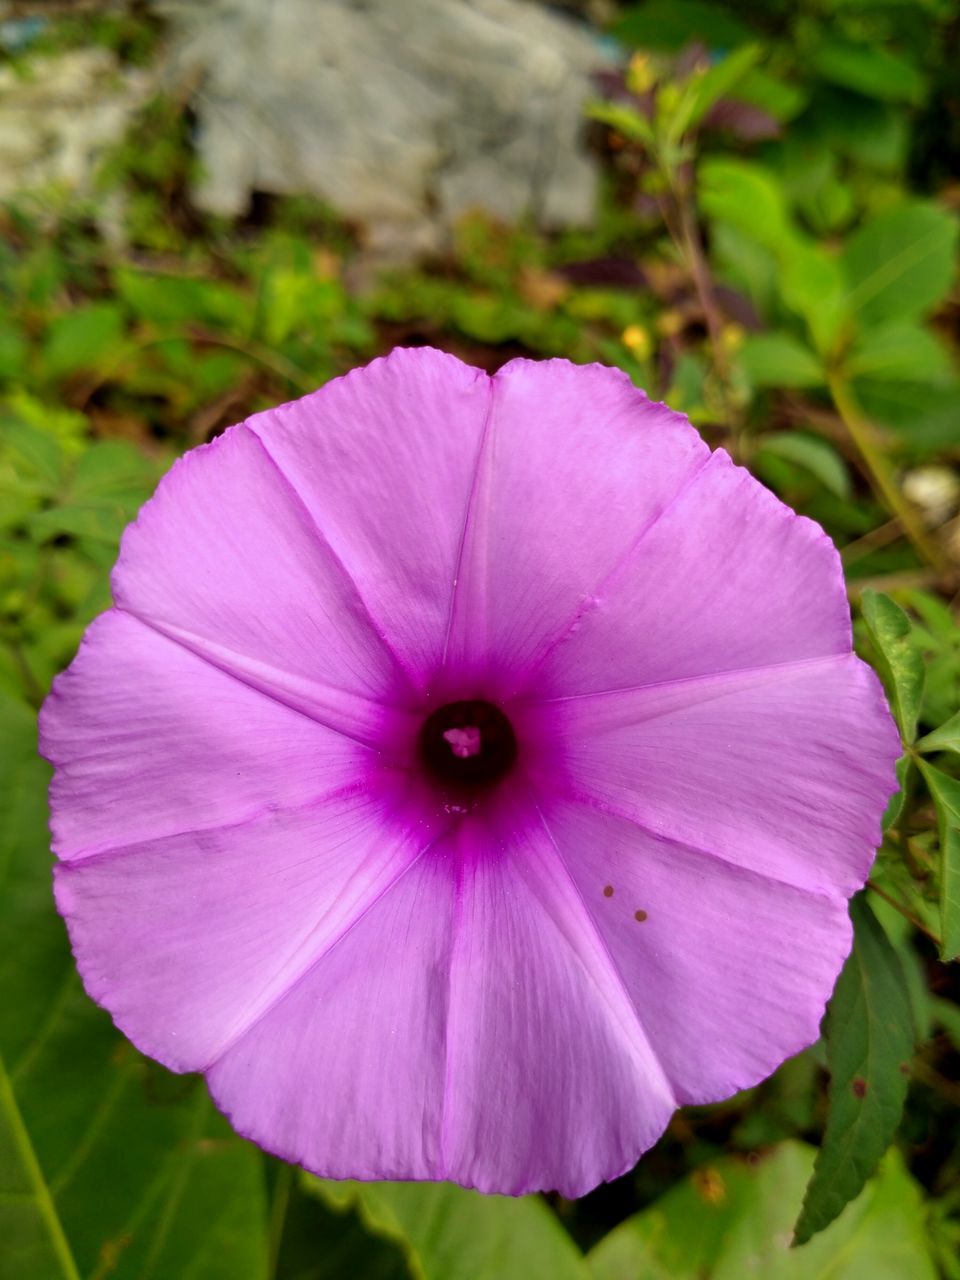 flower, flowering plant, plant, freshness, close-up, beauty in nature, petal, inflorescence, purple, flower head, fragility, growth, macro photography, pink, nature, no people, morning glory, focus on foreground, petunia, wildflower, outdoors, day, magenta, pollen